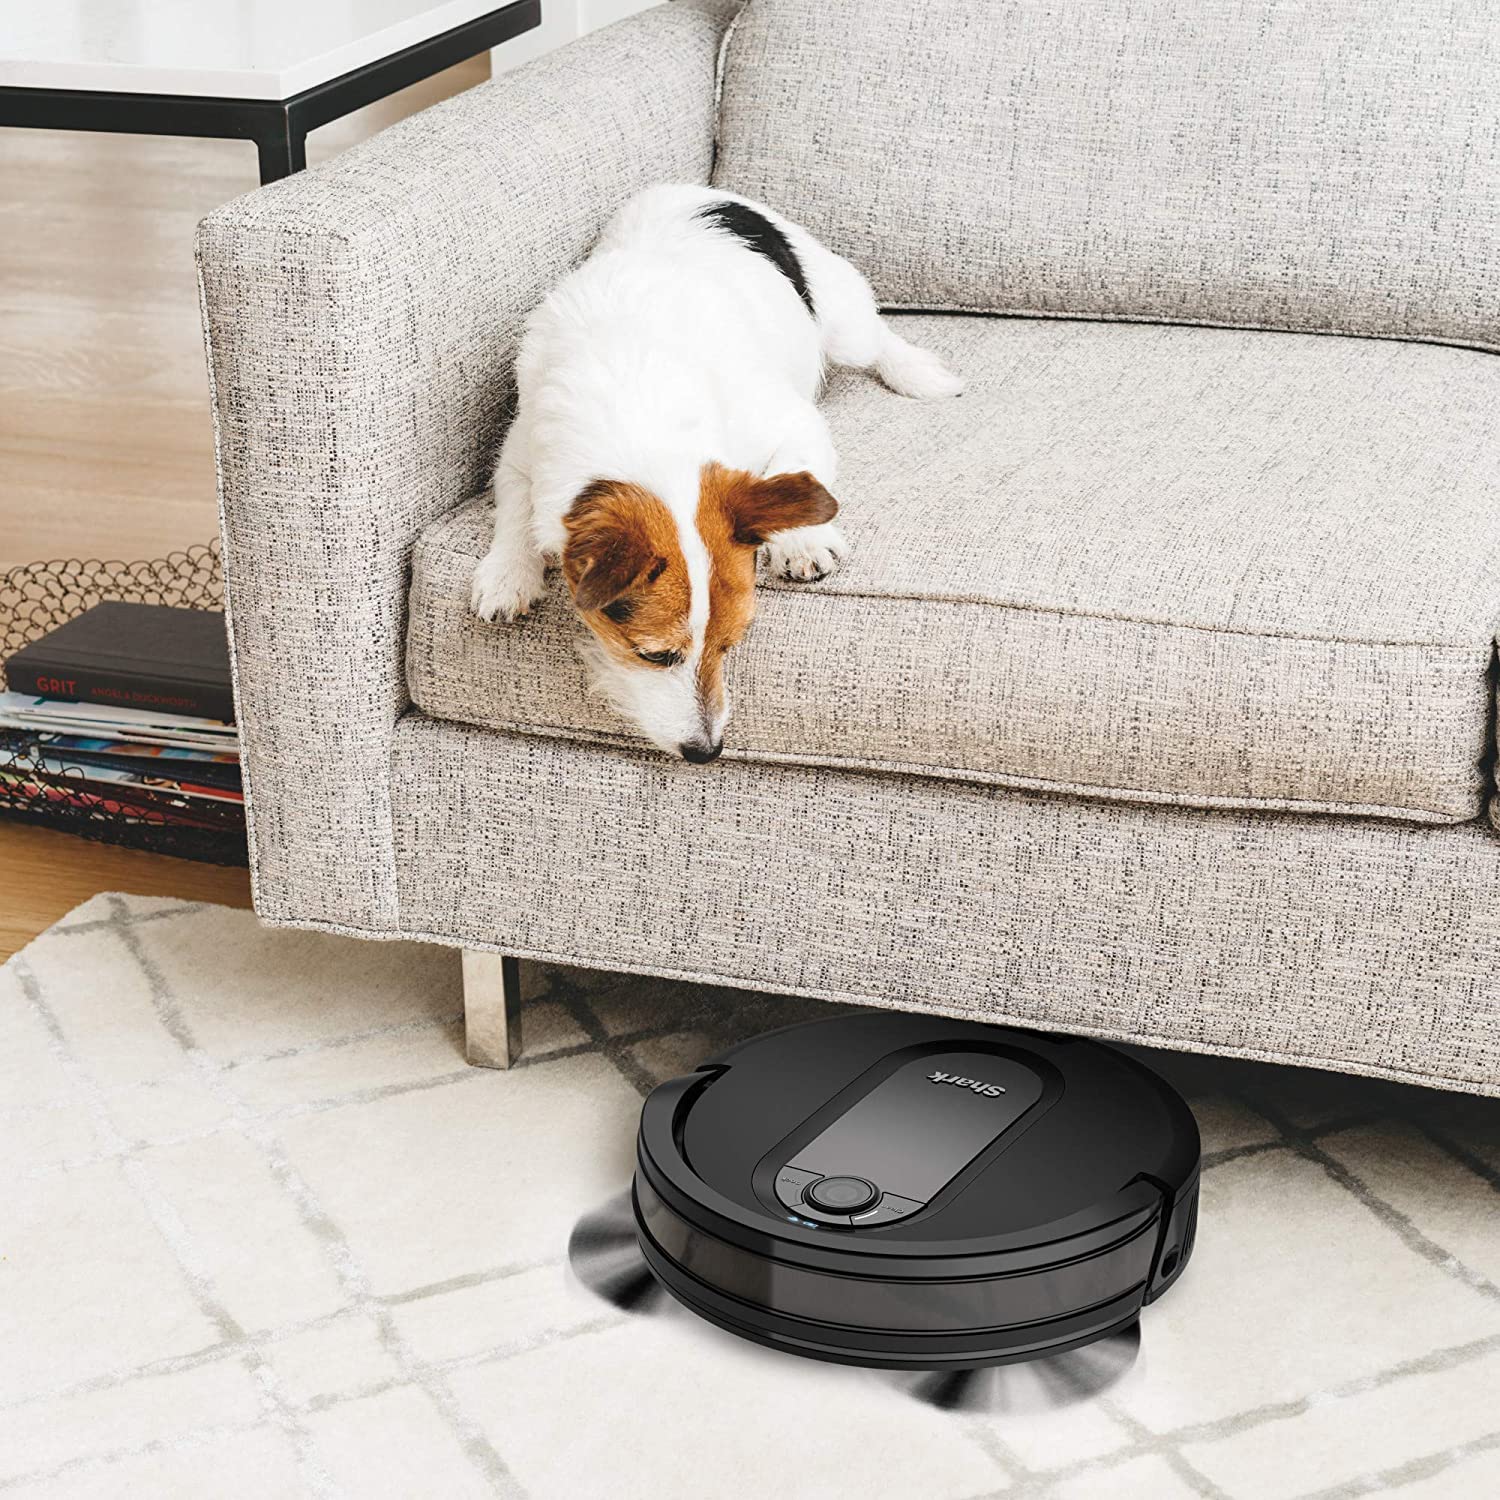 Restored Shark IQ Robot RV1100 AppControlled Robot Vacuum with Wifi and Home Mapping, Pet Hair Strong Suction with Alexa (Refurbished) - image 8 of 9